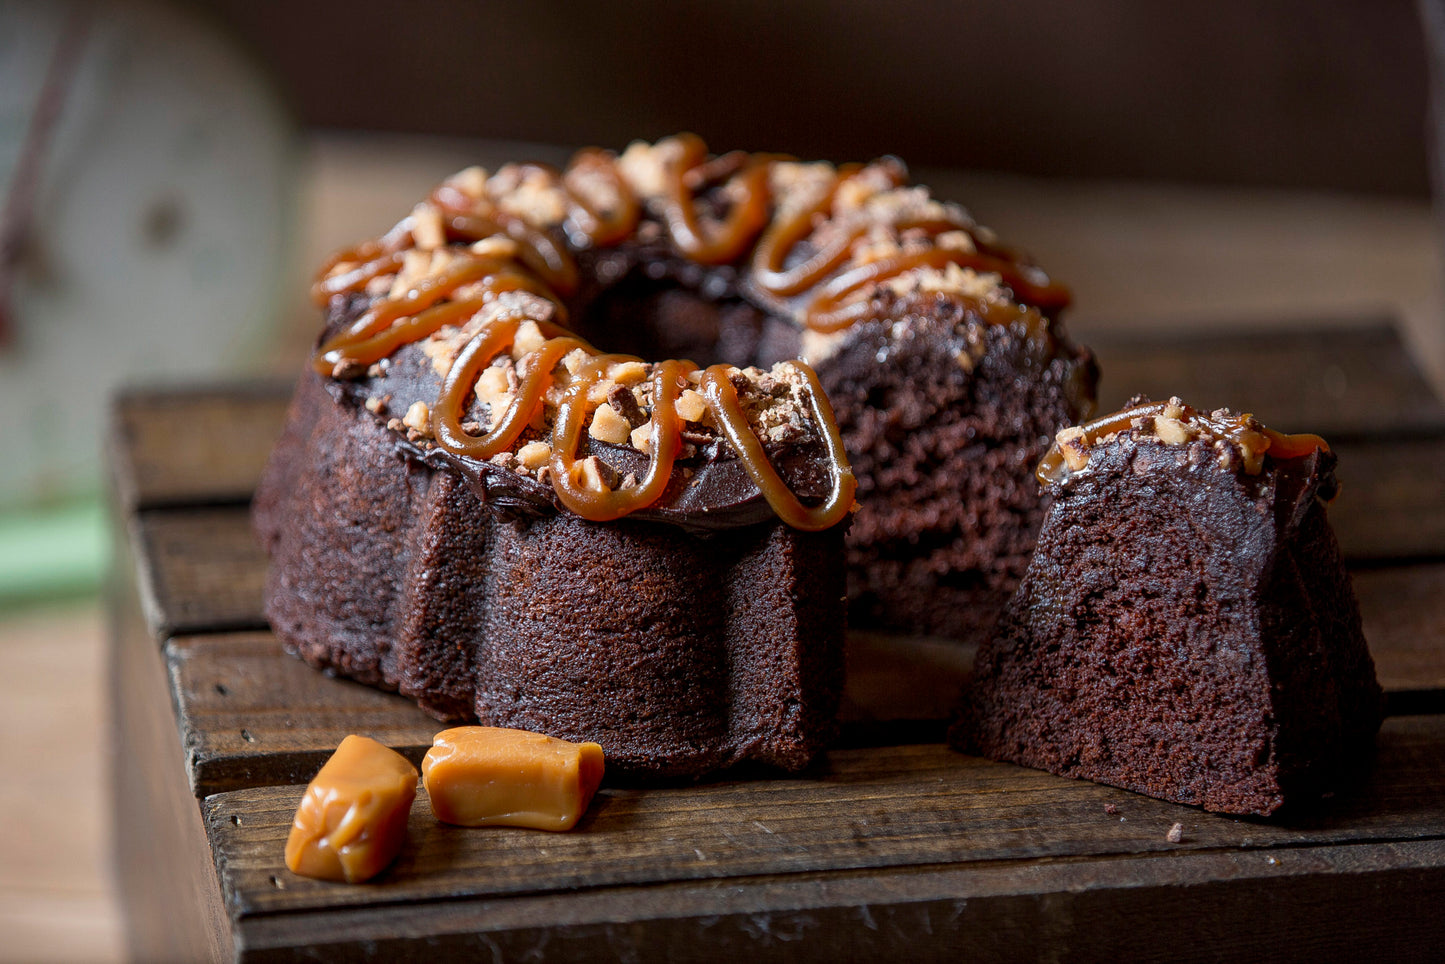 Get ready to indulge in a heavenly delight with our Brunette Salted Caramel Bundt Cake. This delectable treat boasts a luscious Double Chocolate cake, topped with a mouthwatering combination of toffee, sea salt, smooth chocolate ganache, and creamy caramel. Treat yourself to a moment of pure bliss!